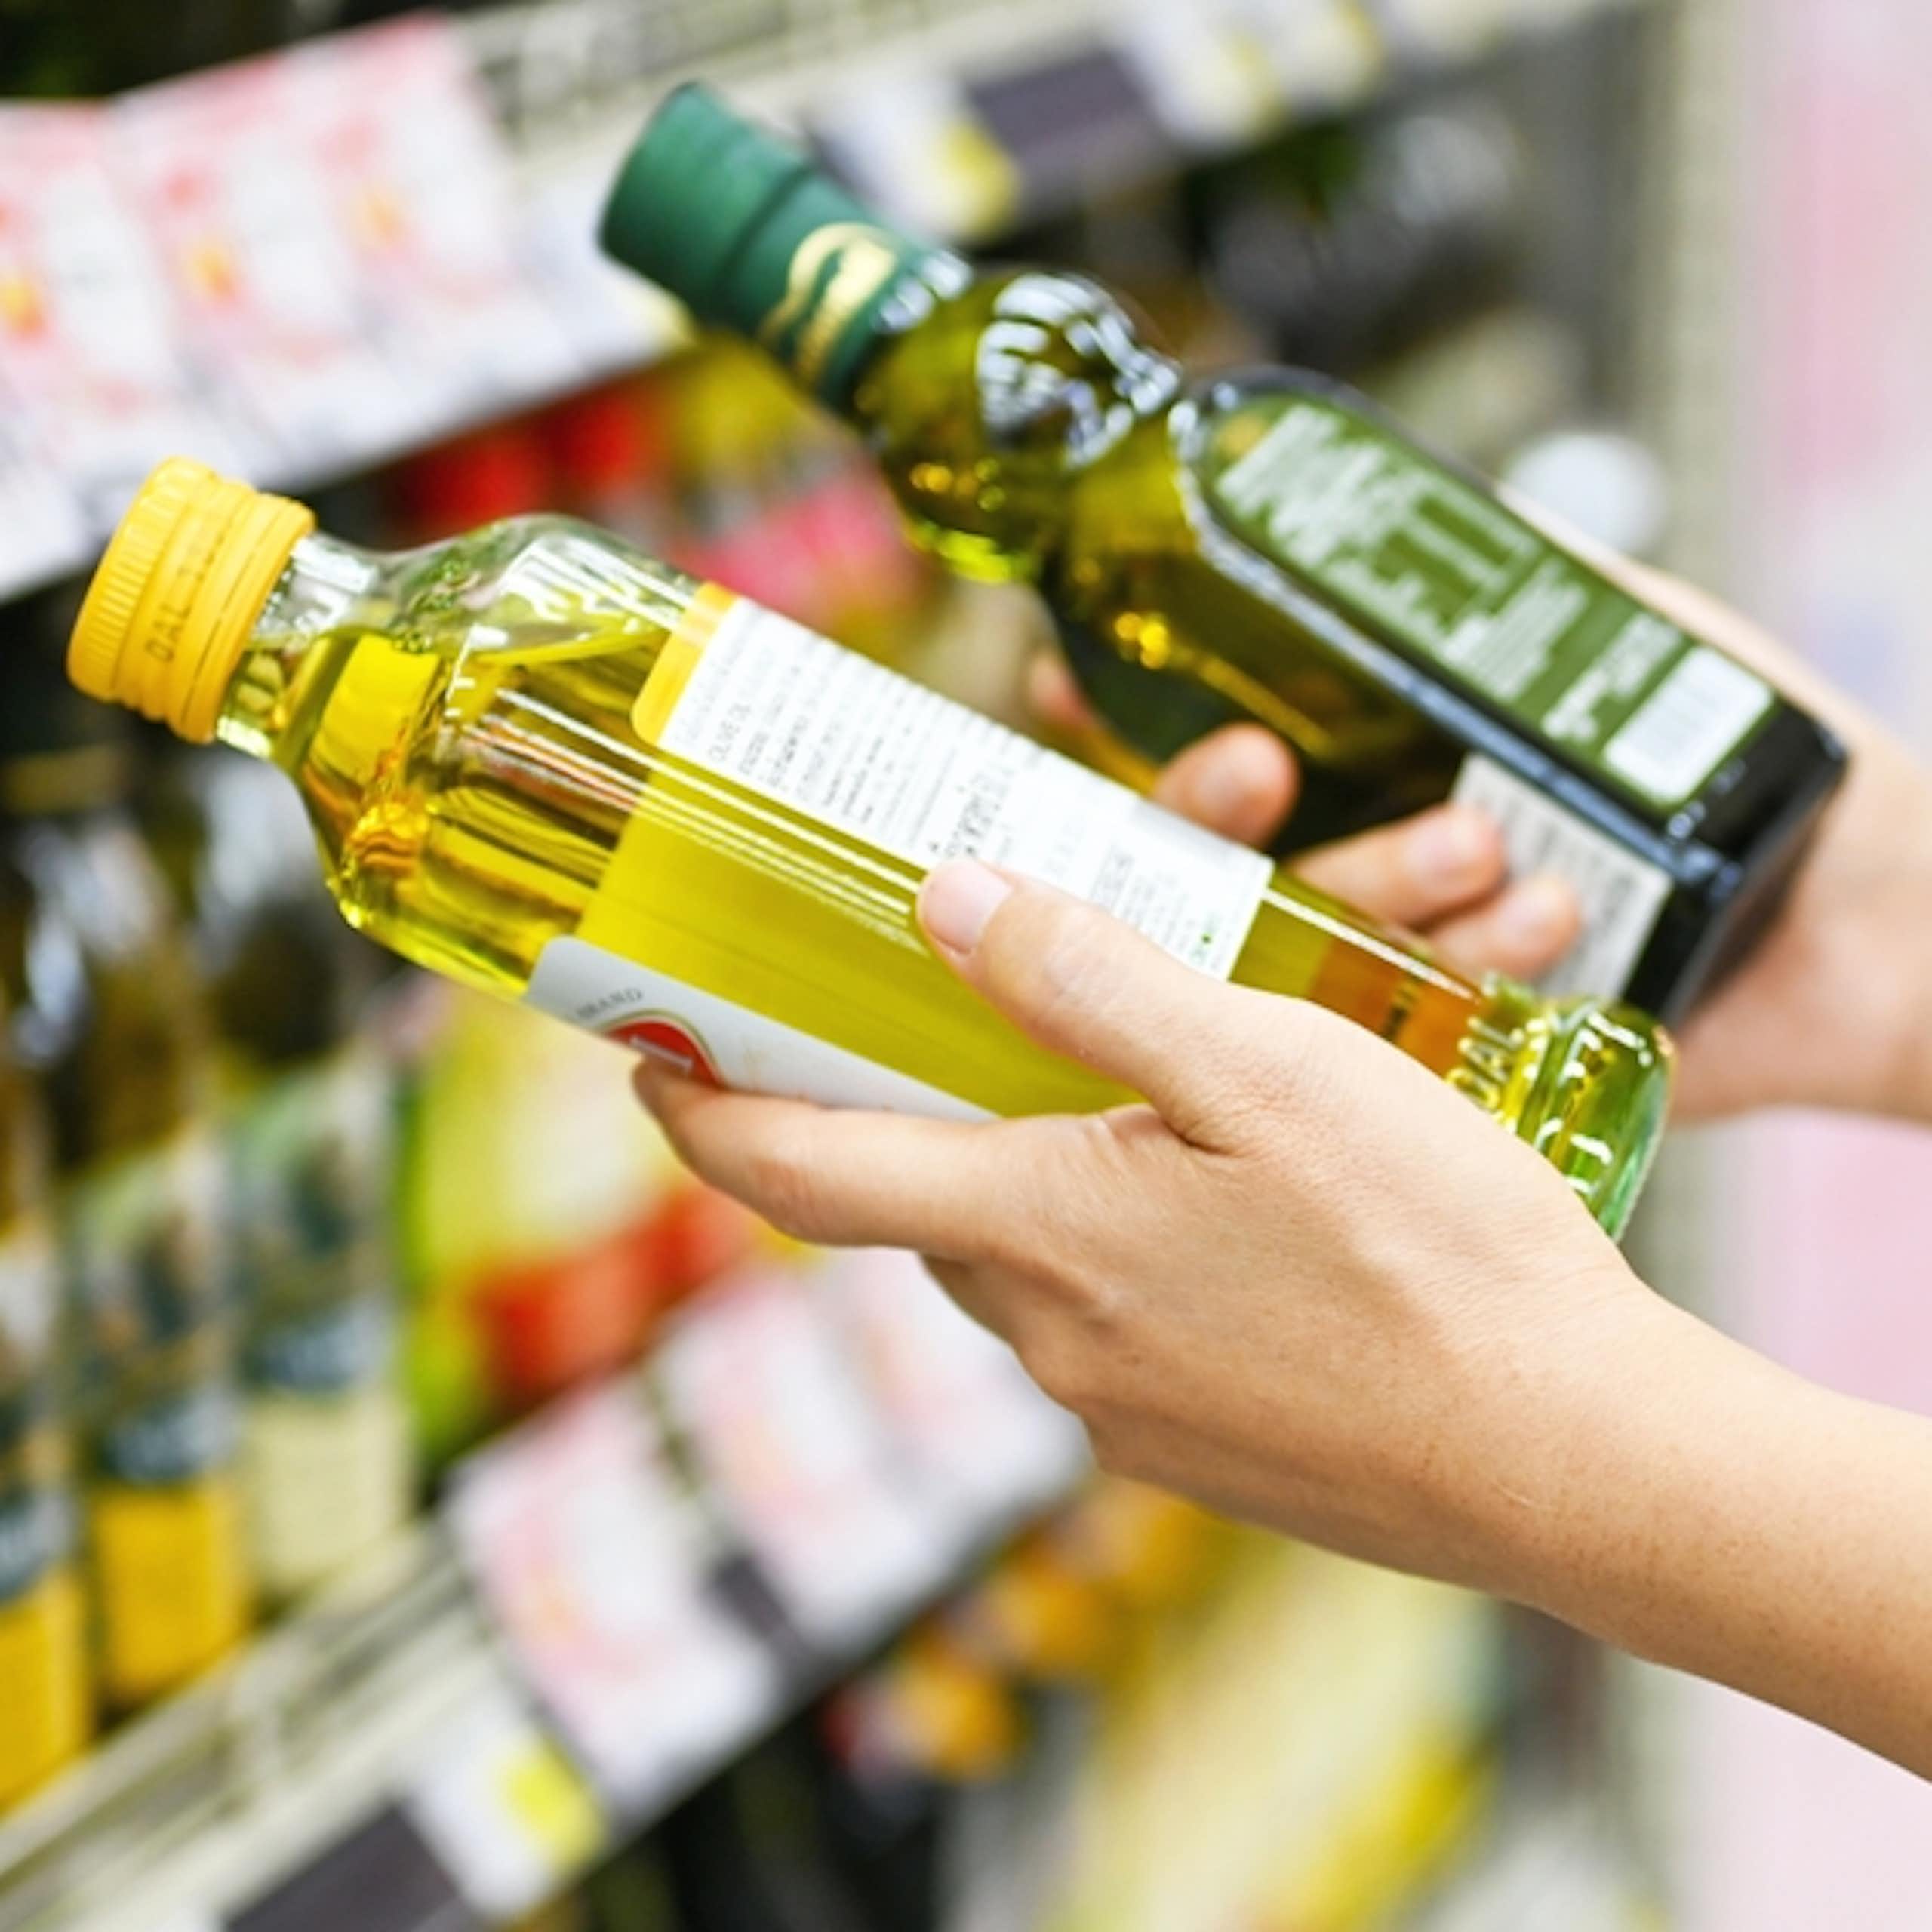 Woman in supermarket comparing two small bottles of oil, one olive oil